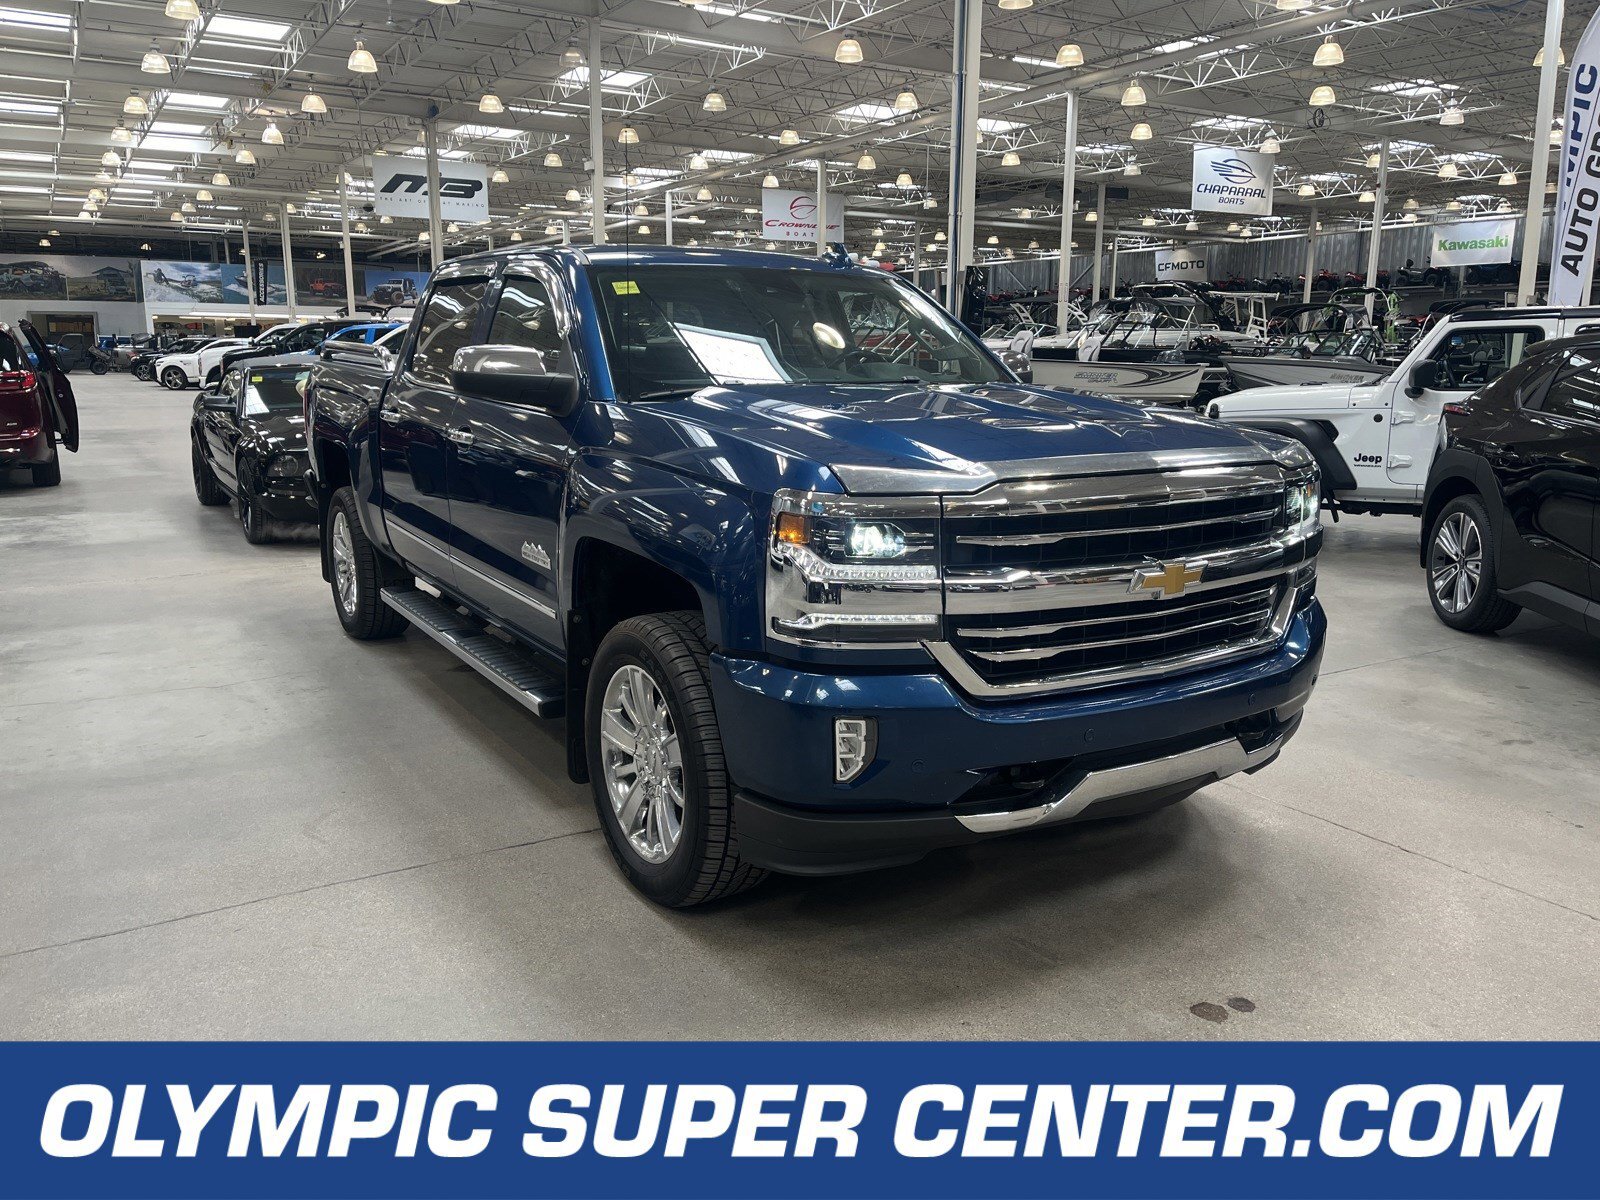 2017 Chevrolet Silverado High Country | 6.2L | FULLY EQUIPPED |